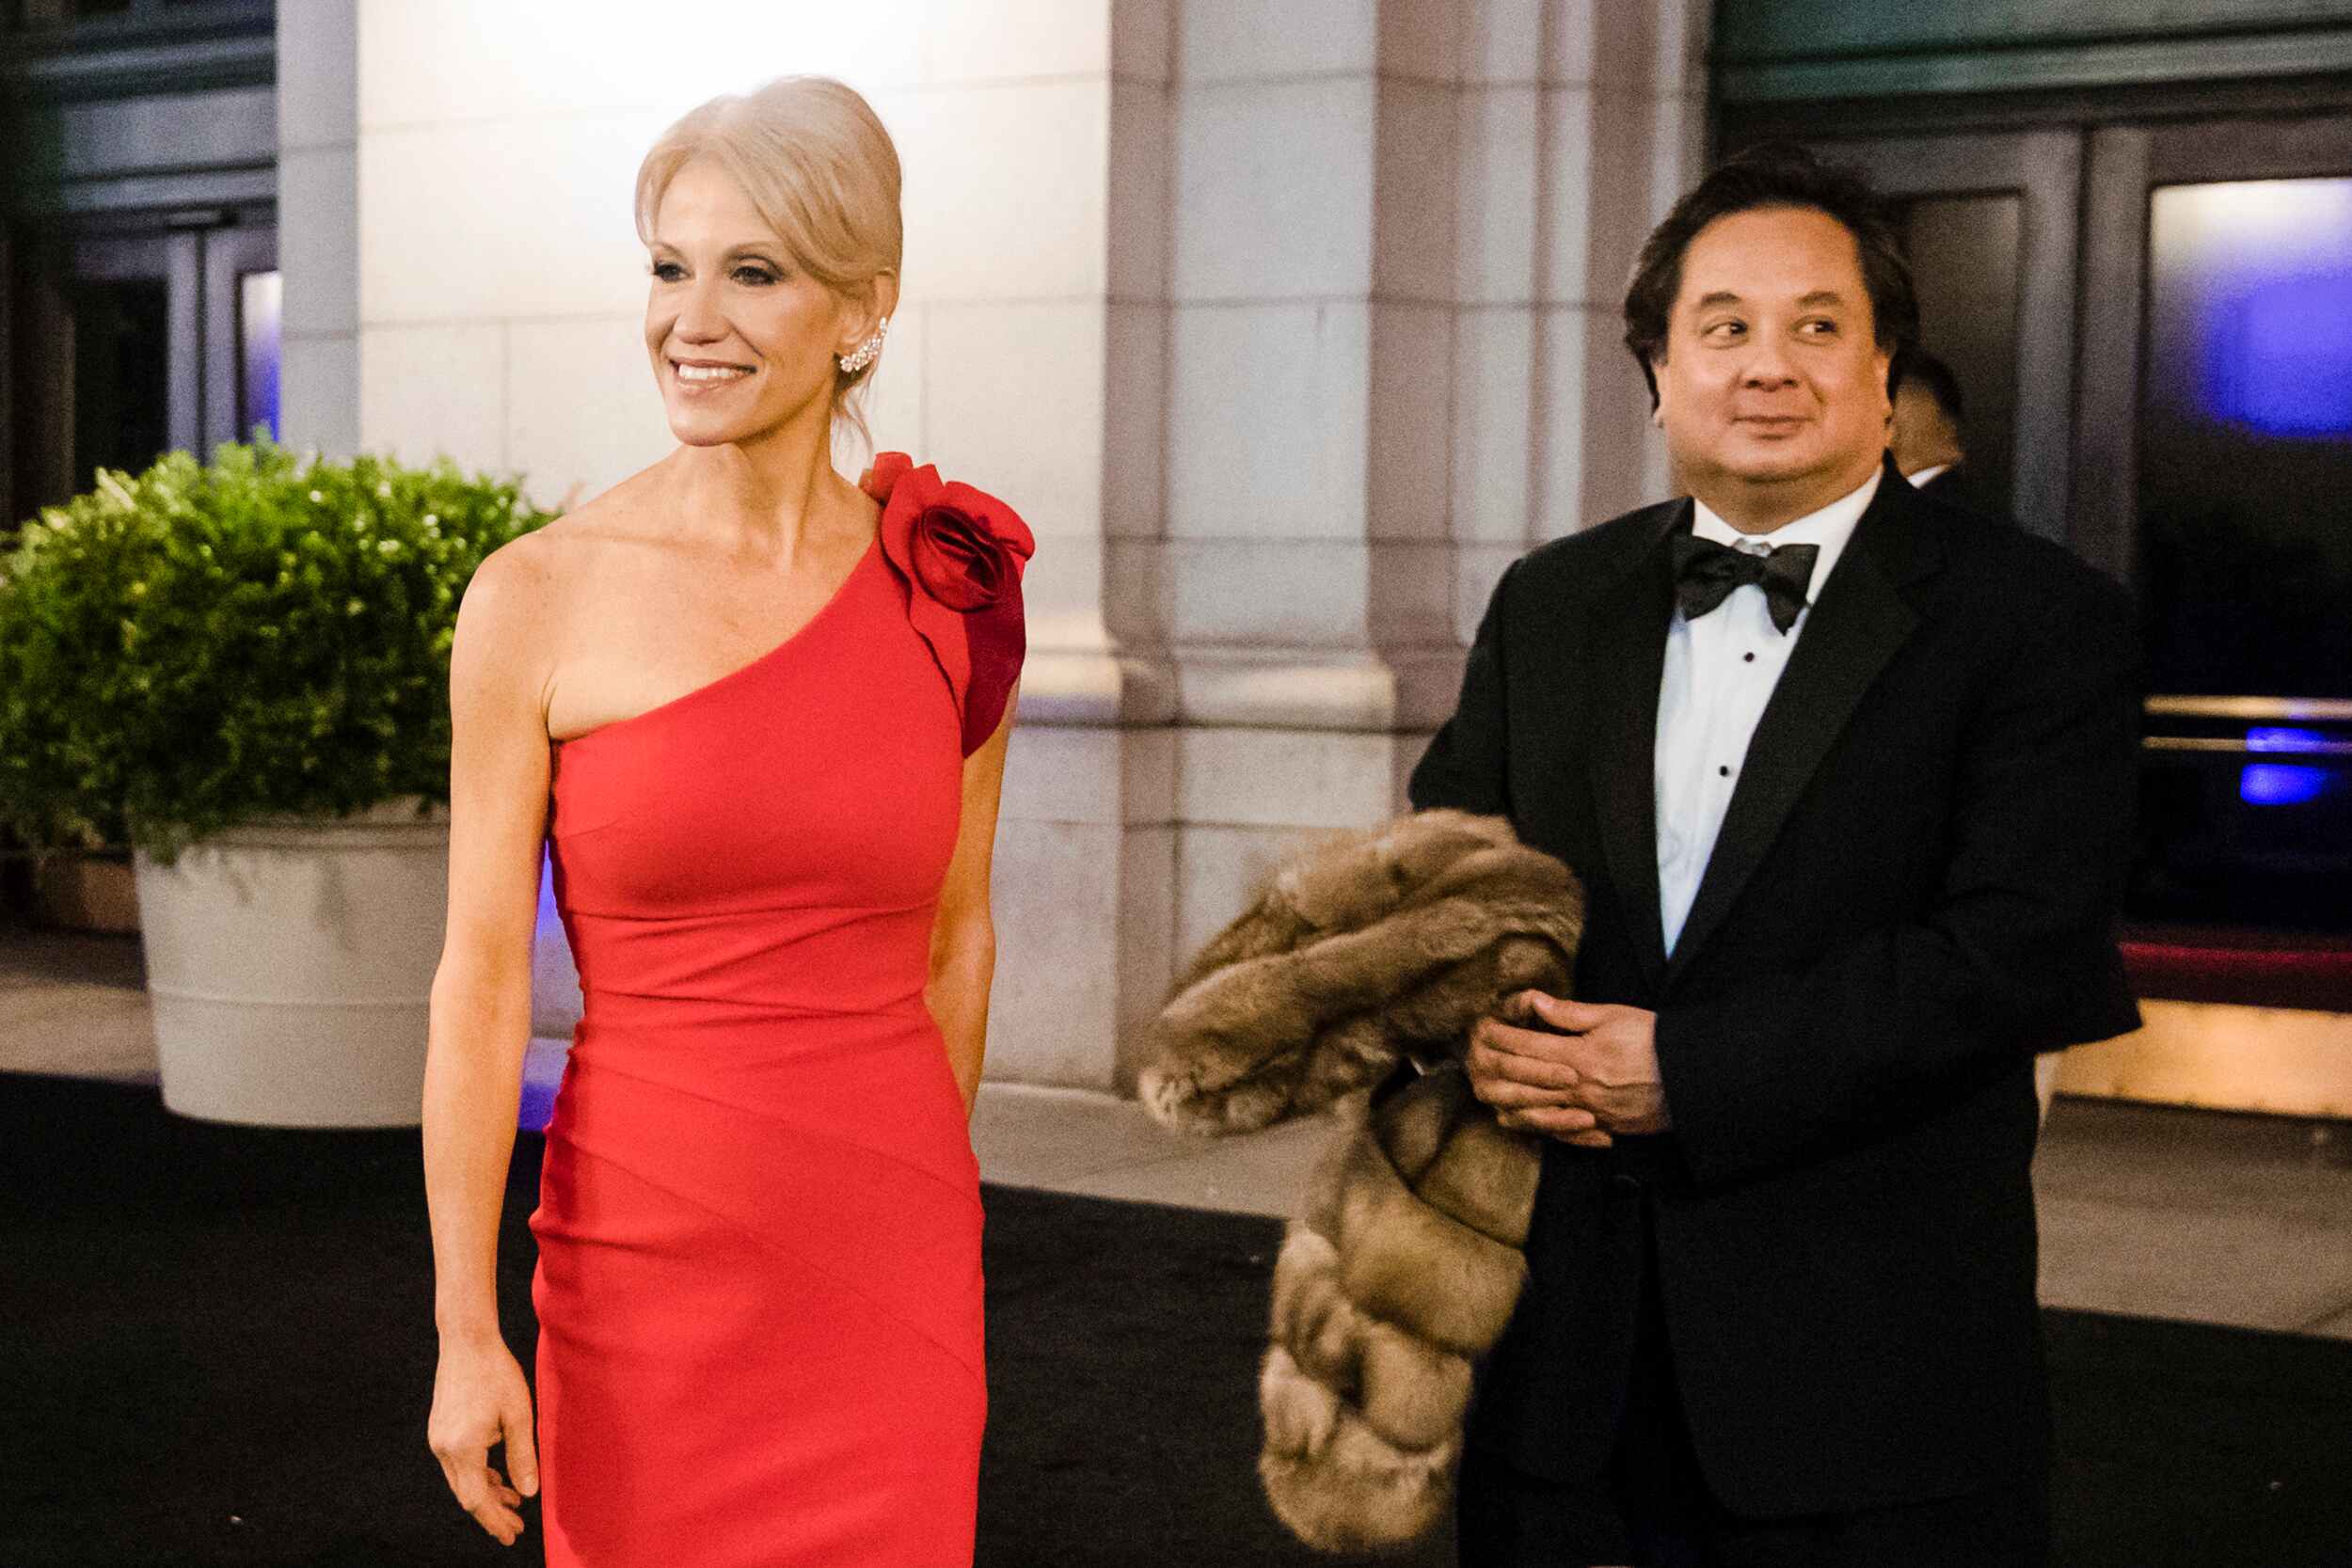 George Conway Biography: Wife, Twitter, Age, Net Worth, Children, Height, Instagram, Wikipedia, Weight